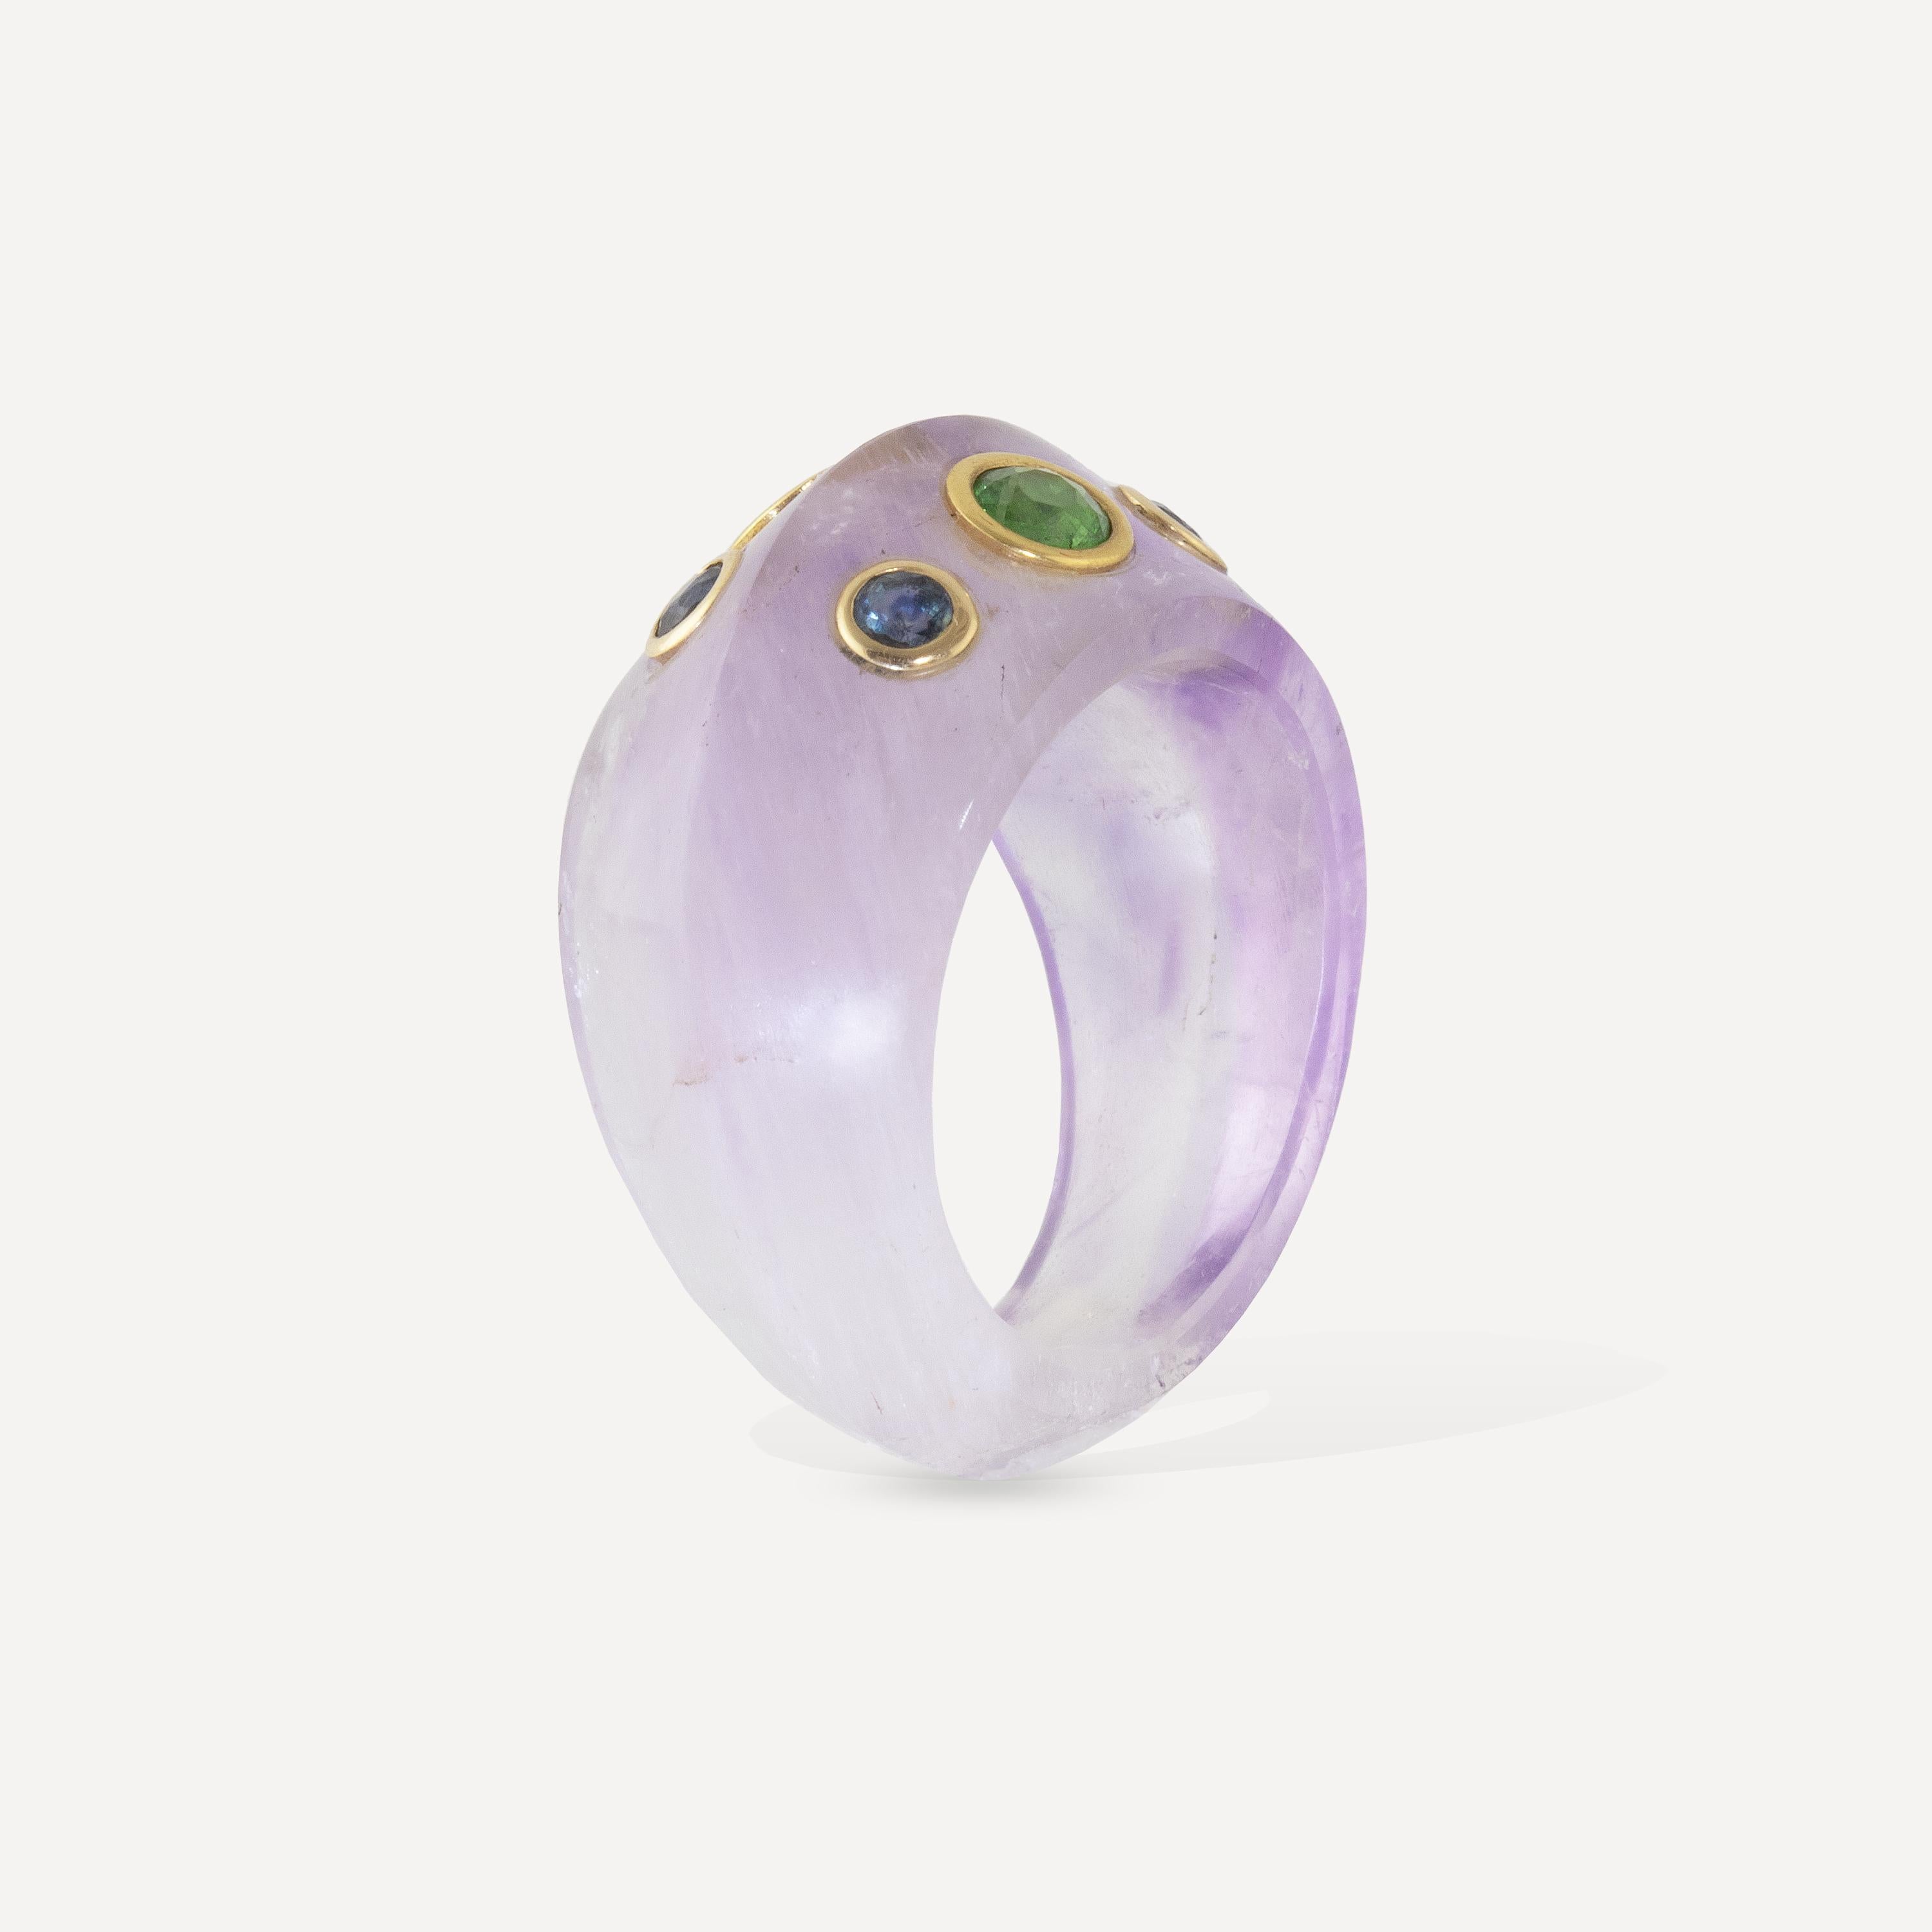 One of a kind Carved Amethyst with Tsavorite Garnet and Sapphire gemstones set in 18k gold.
The ring was hand carved using 28 carats of Amethyst.  The ring has 4 blue sapphires (.32 carats) and 2 tsavorite garnets (.42 carats) set in 18k gold